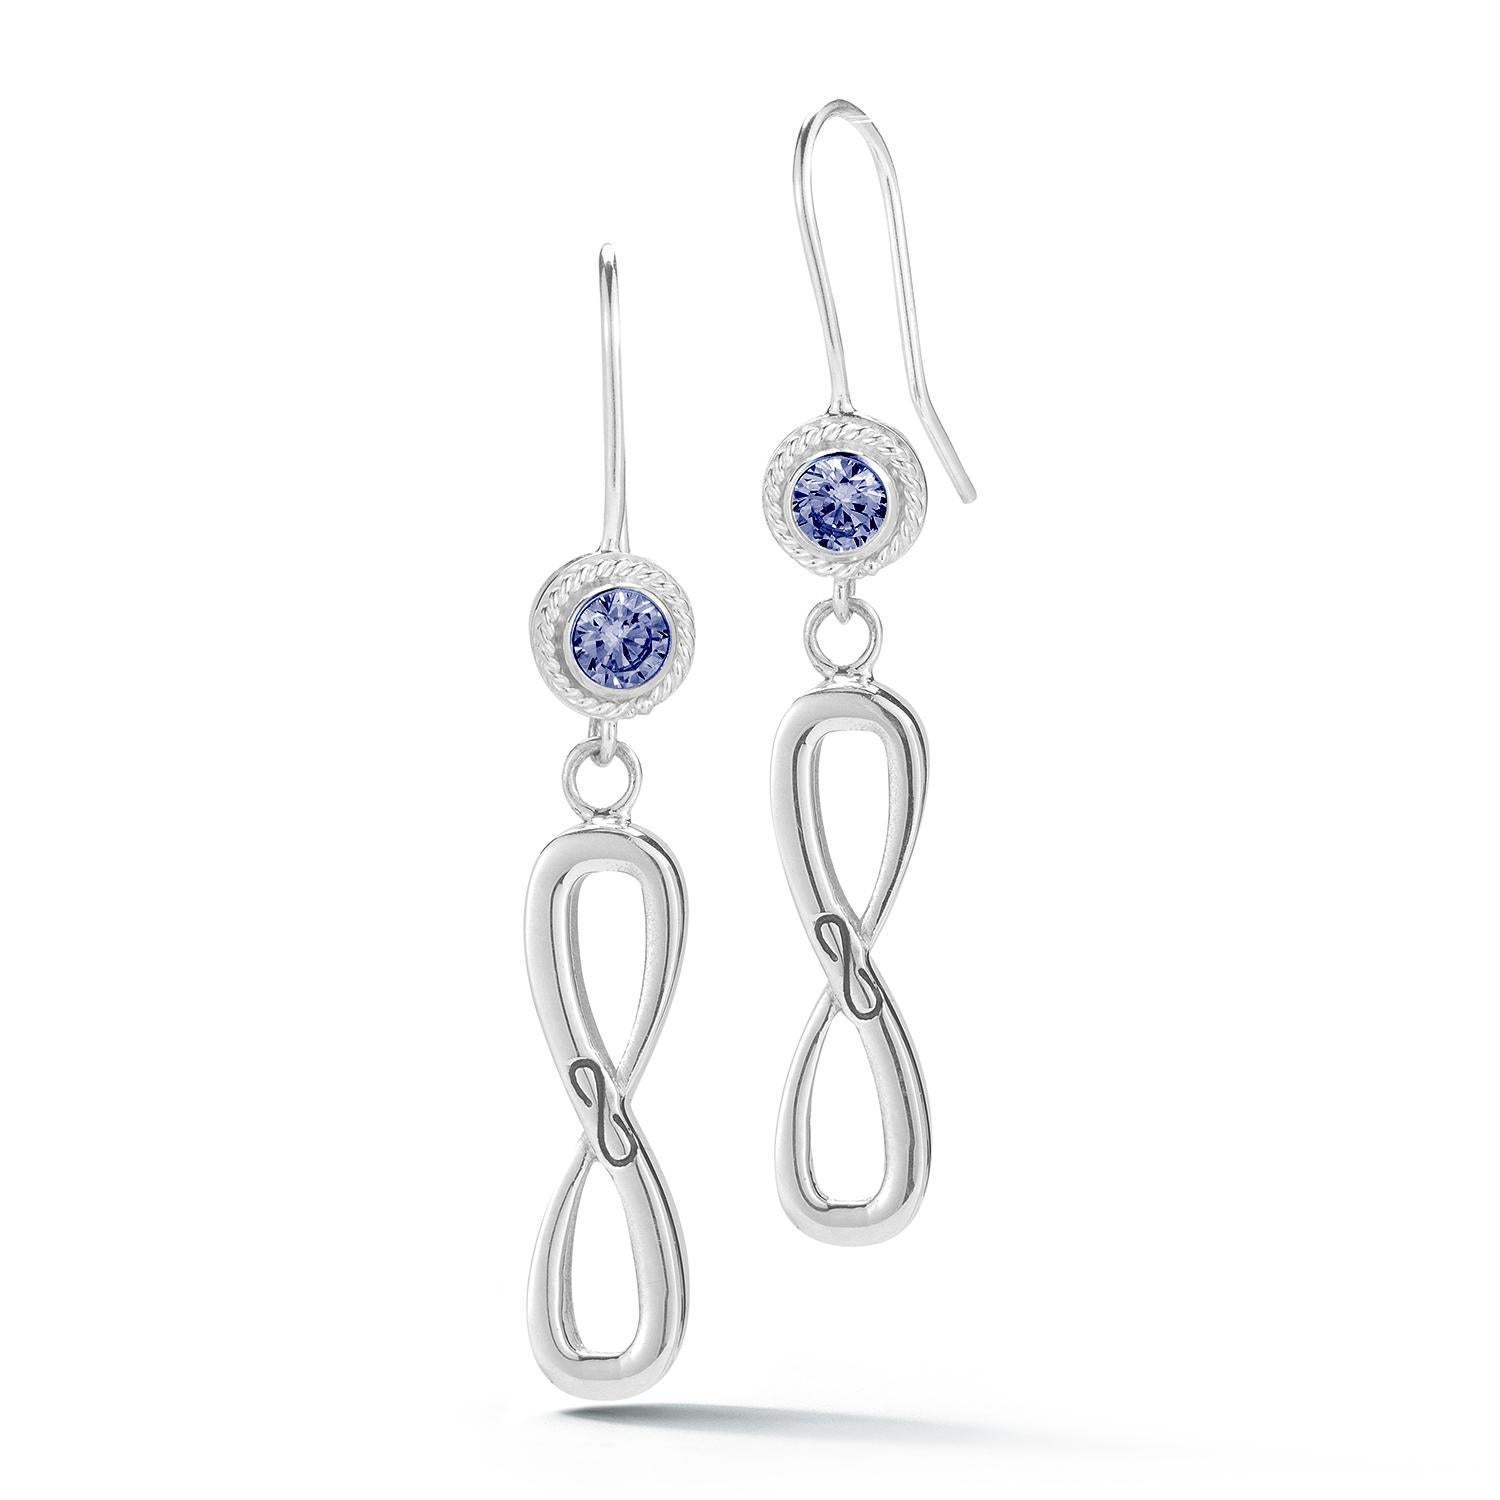 Designed in NYC

.925 Sterling Silver 2 x 7 mm Light Blue Topaz Infinity Stone Stud Wire Hook Earrings. When it comes to self-expression, the style possibilities are endless. Infinity stone stud wire hook earrings:

Sterling silver 
High-polish